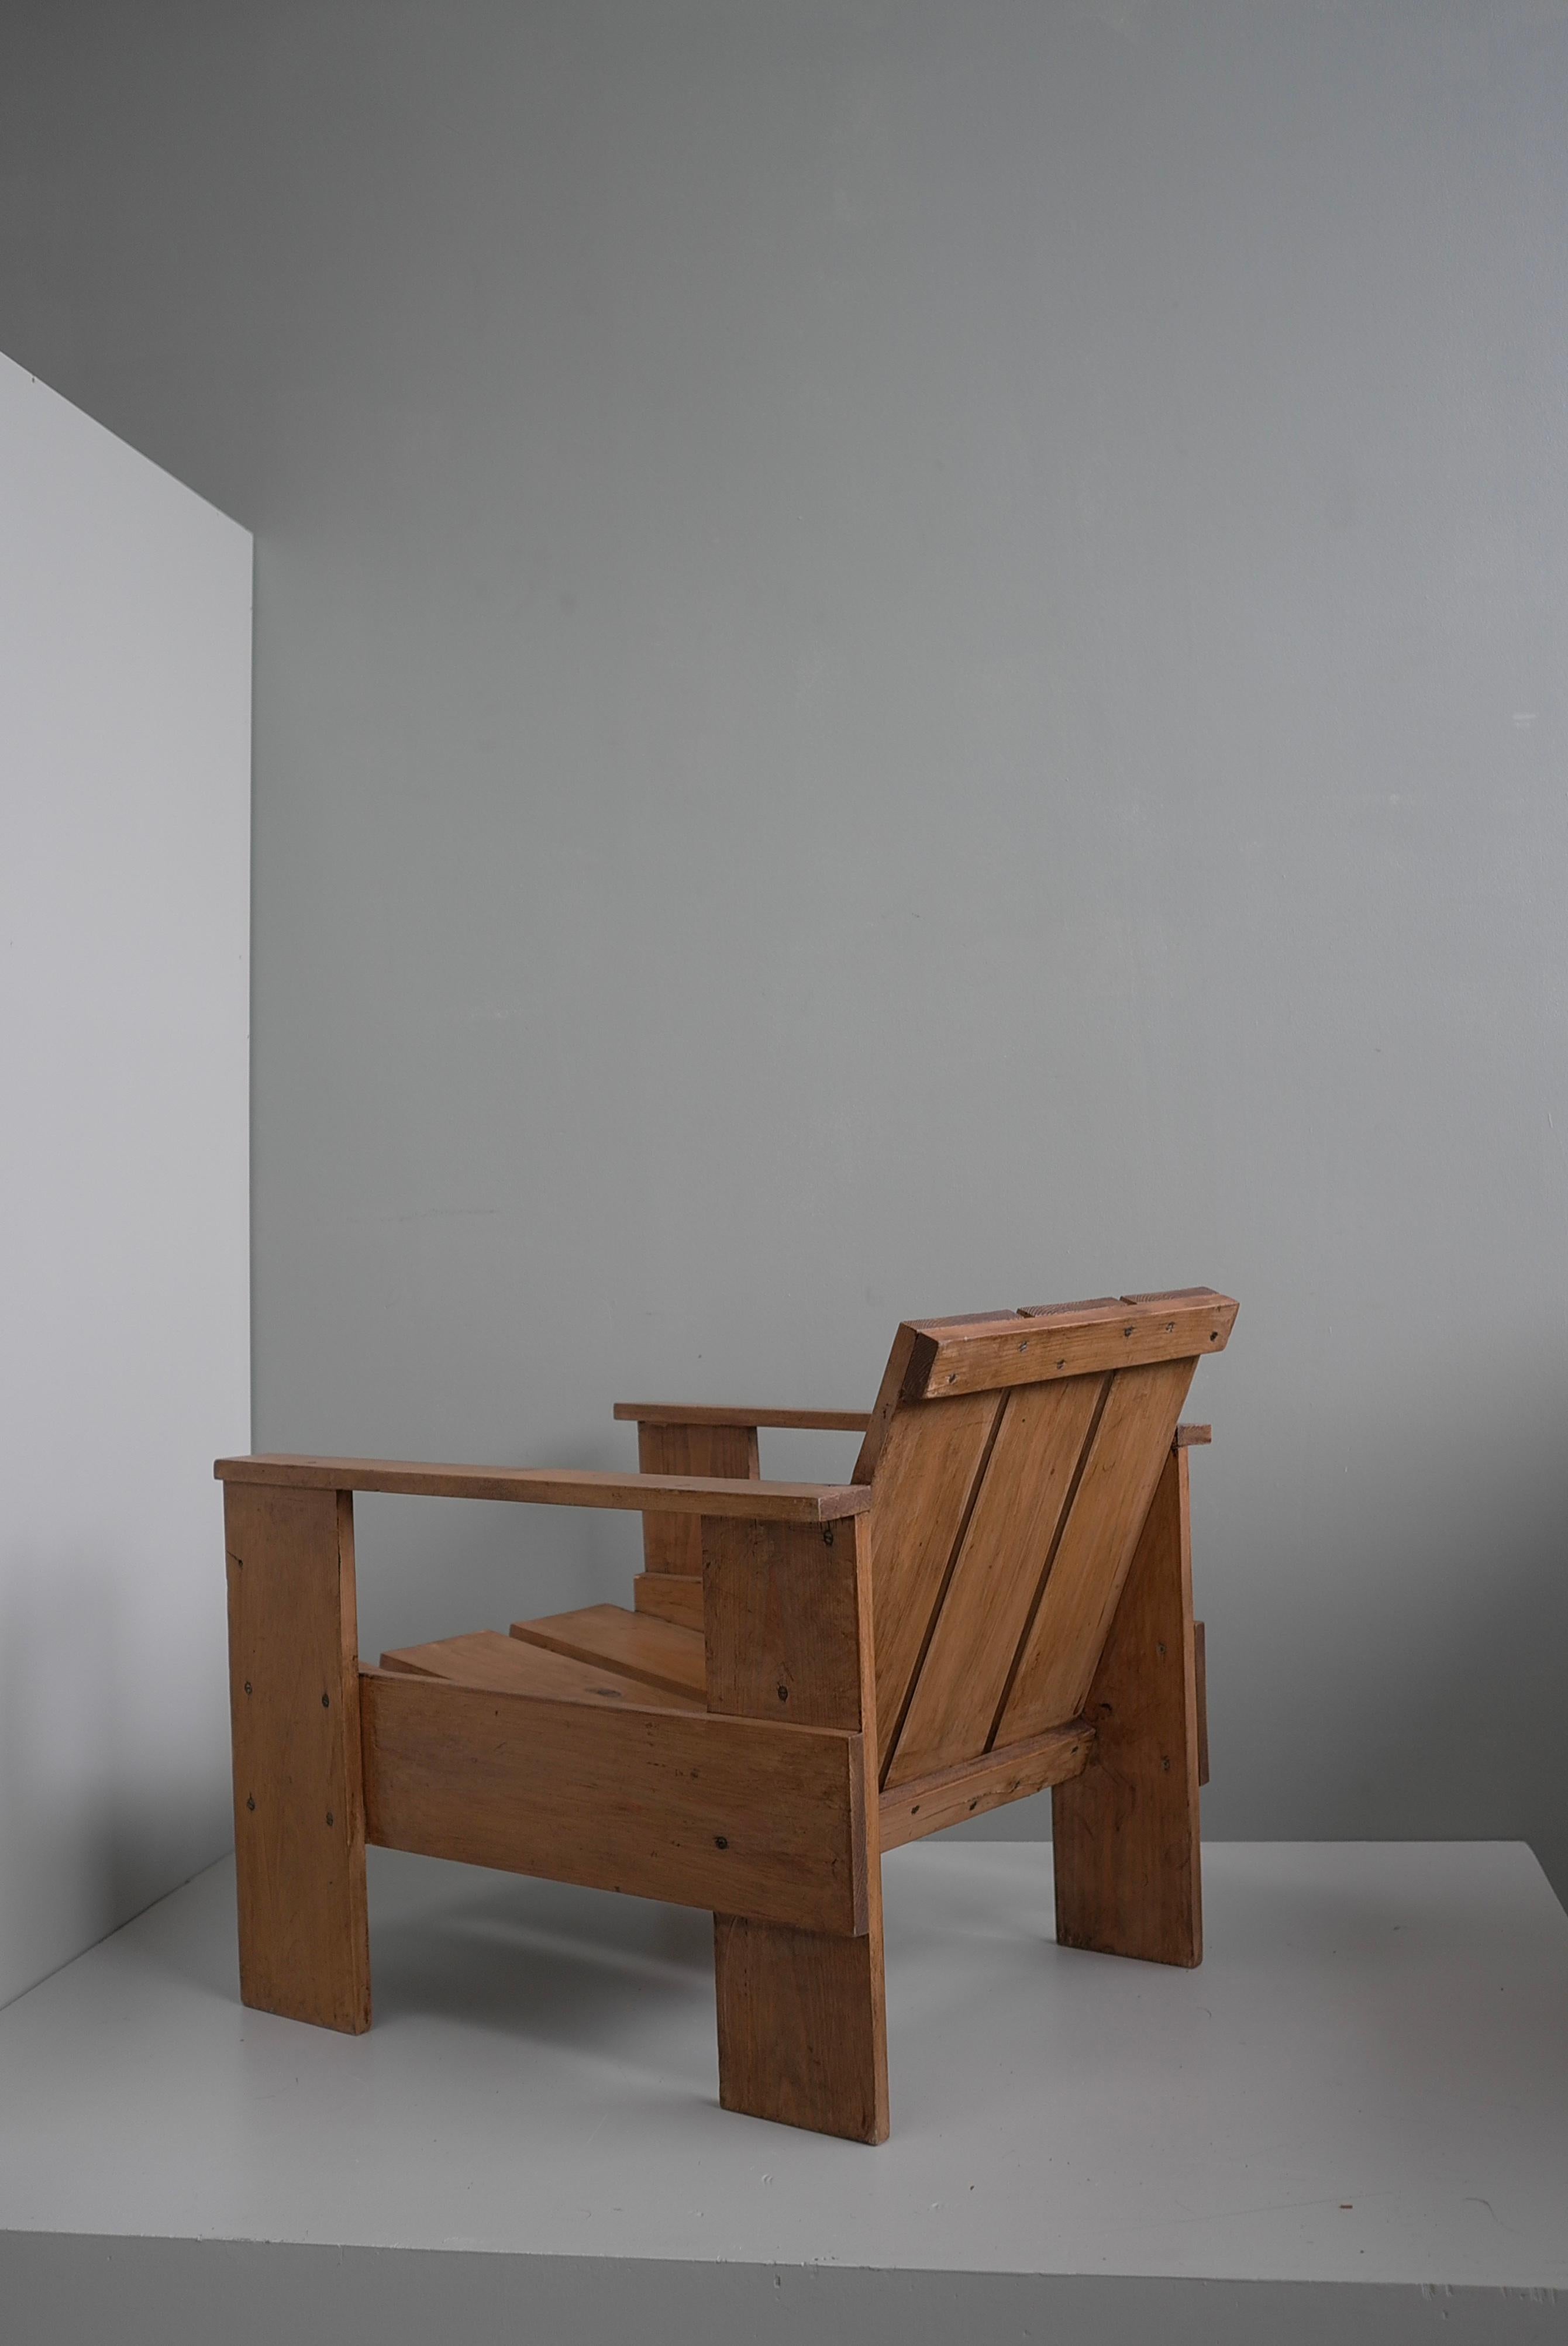 Crate Chair in style of Gerrit Rietveld, The Netherlands 1960's For Sale 4